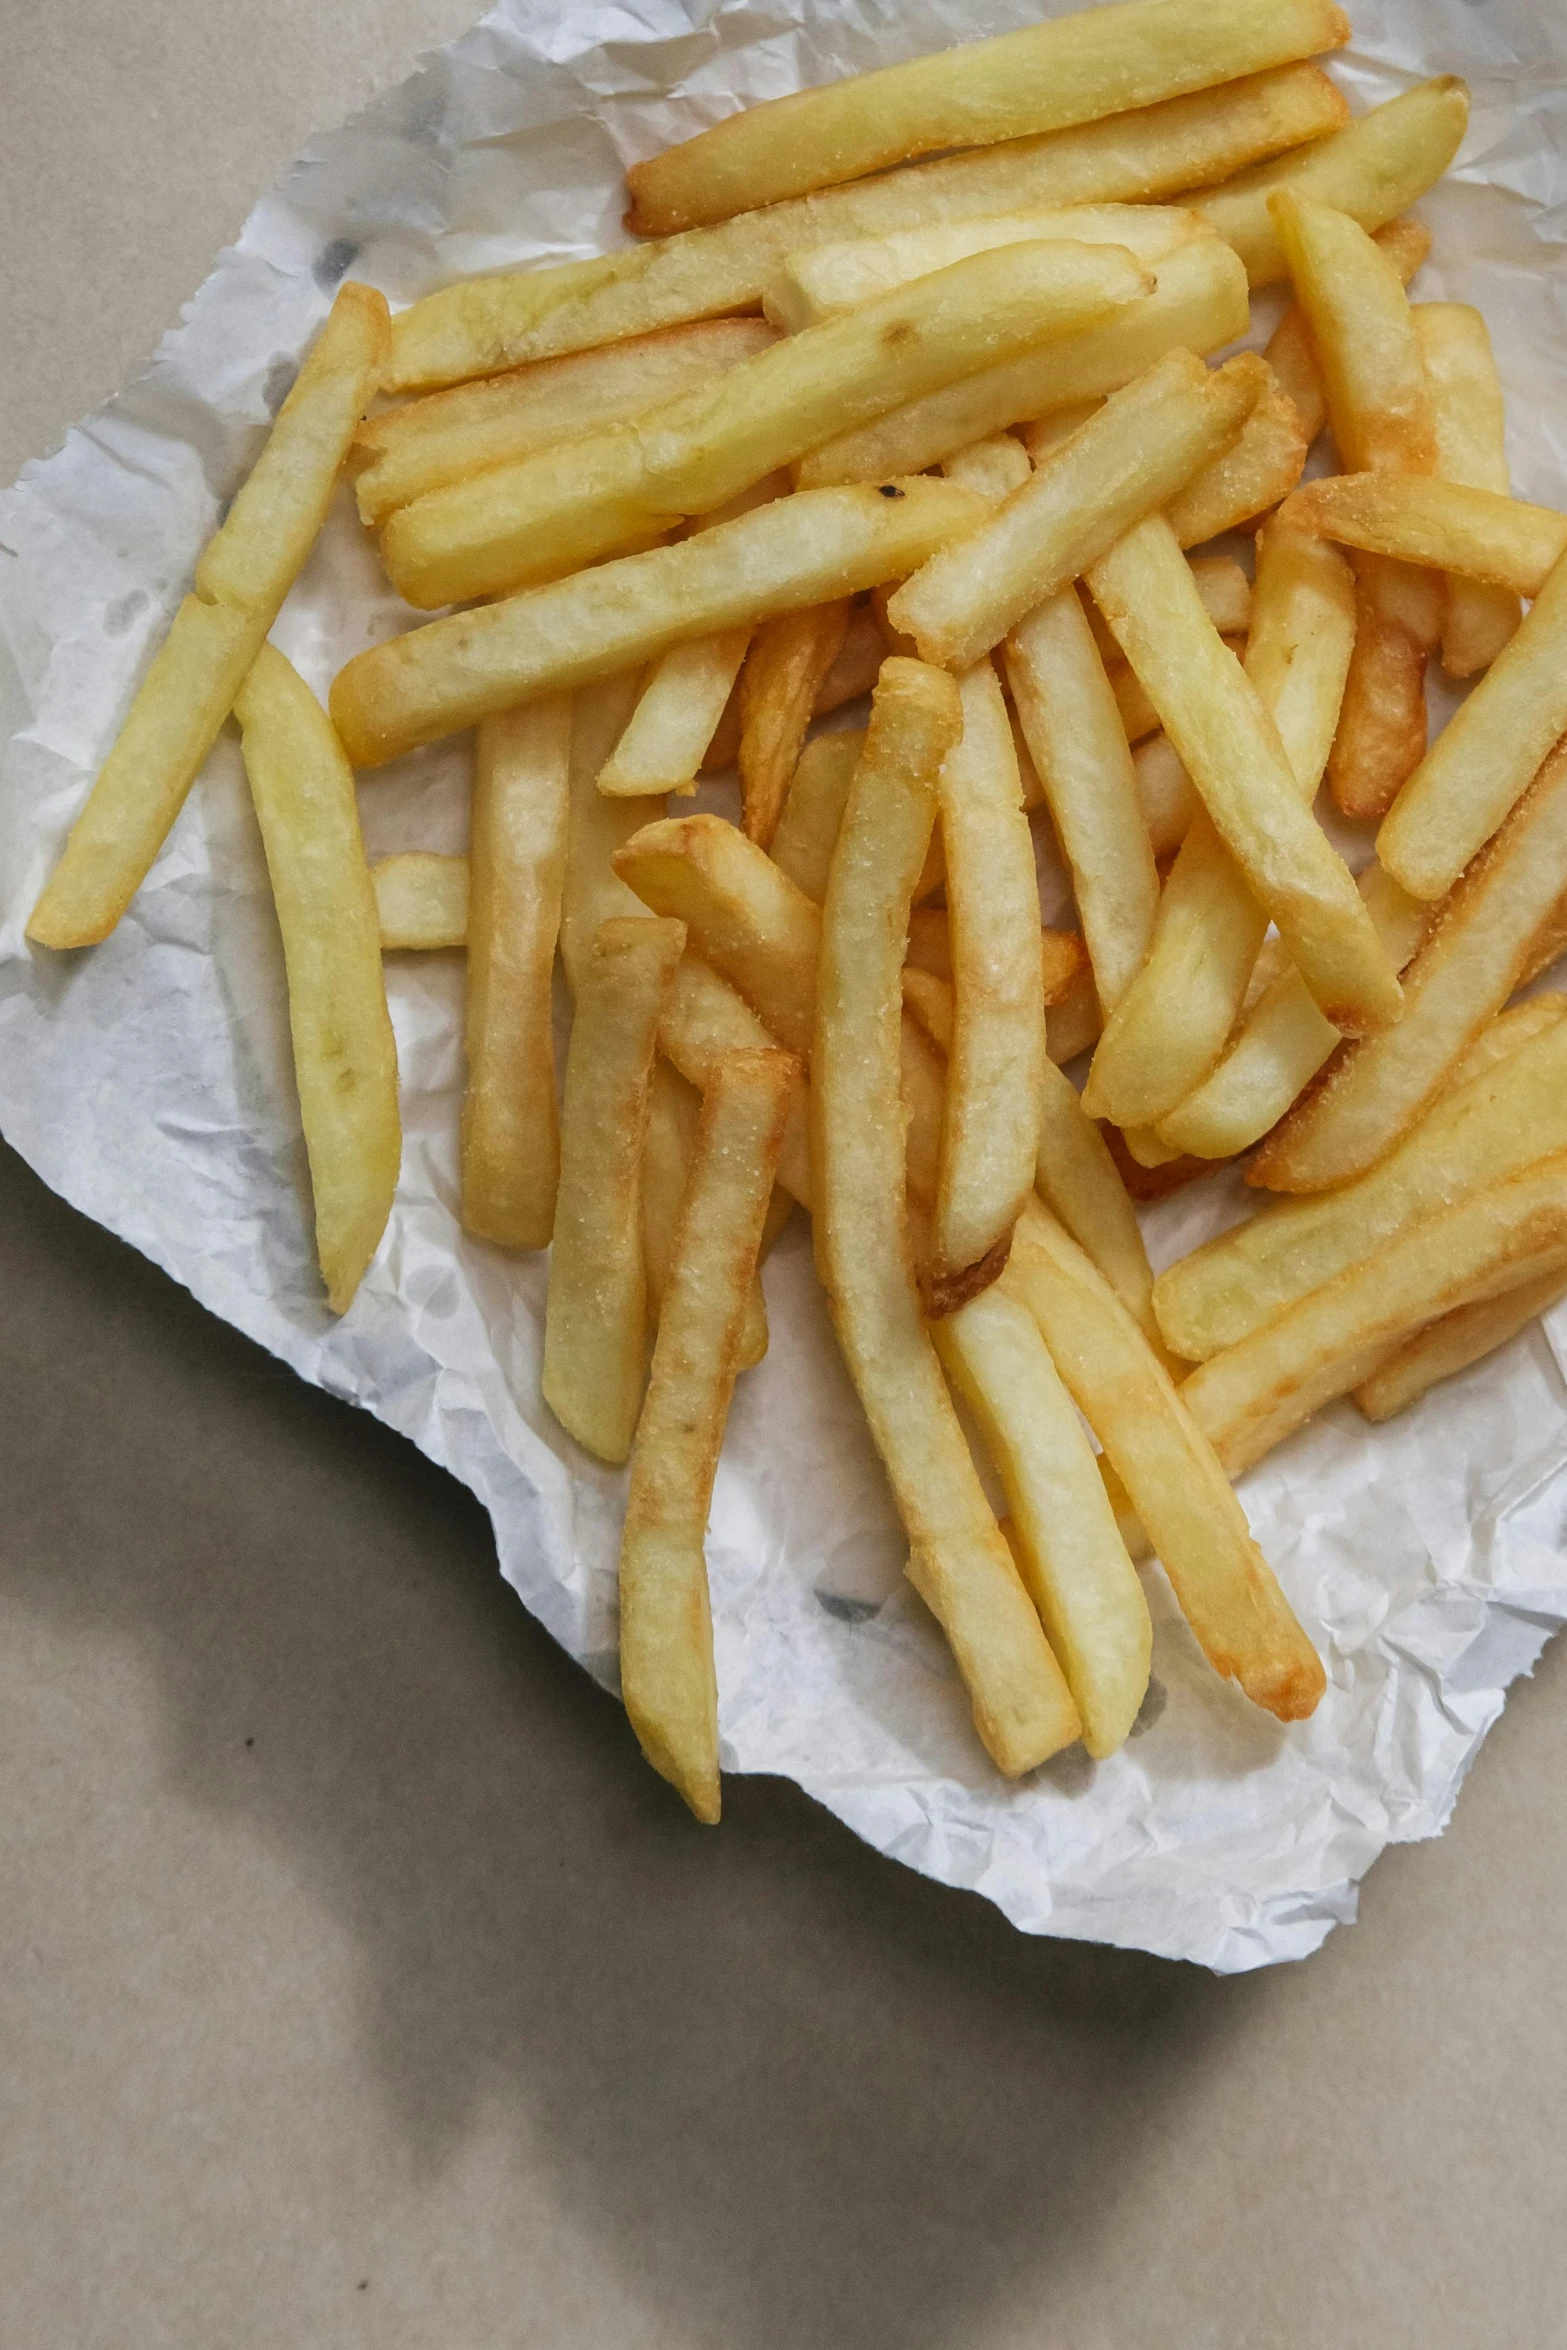 a plate of french fries on a table, large)}], traditional medium, #trending, various sizes